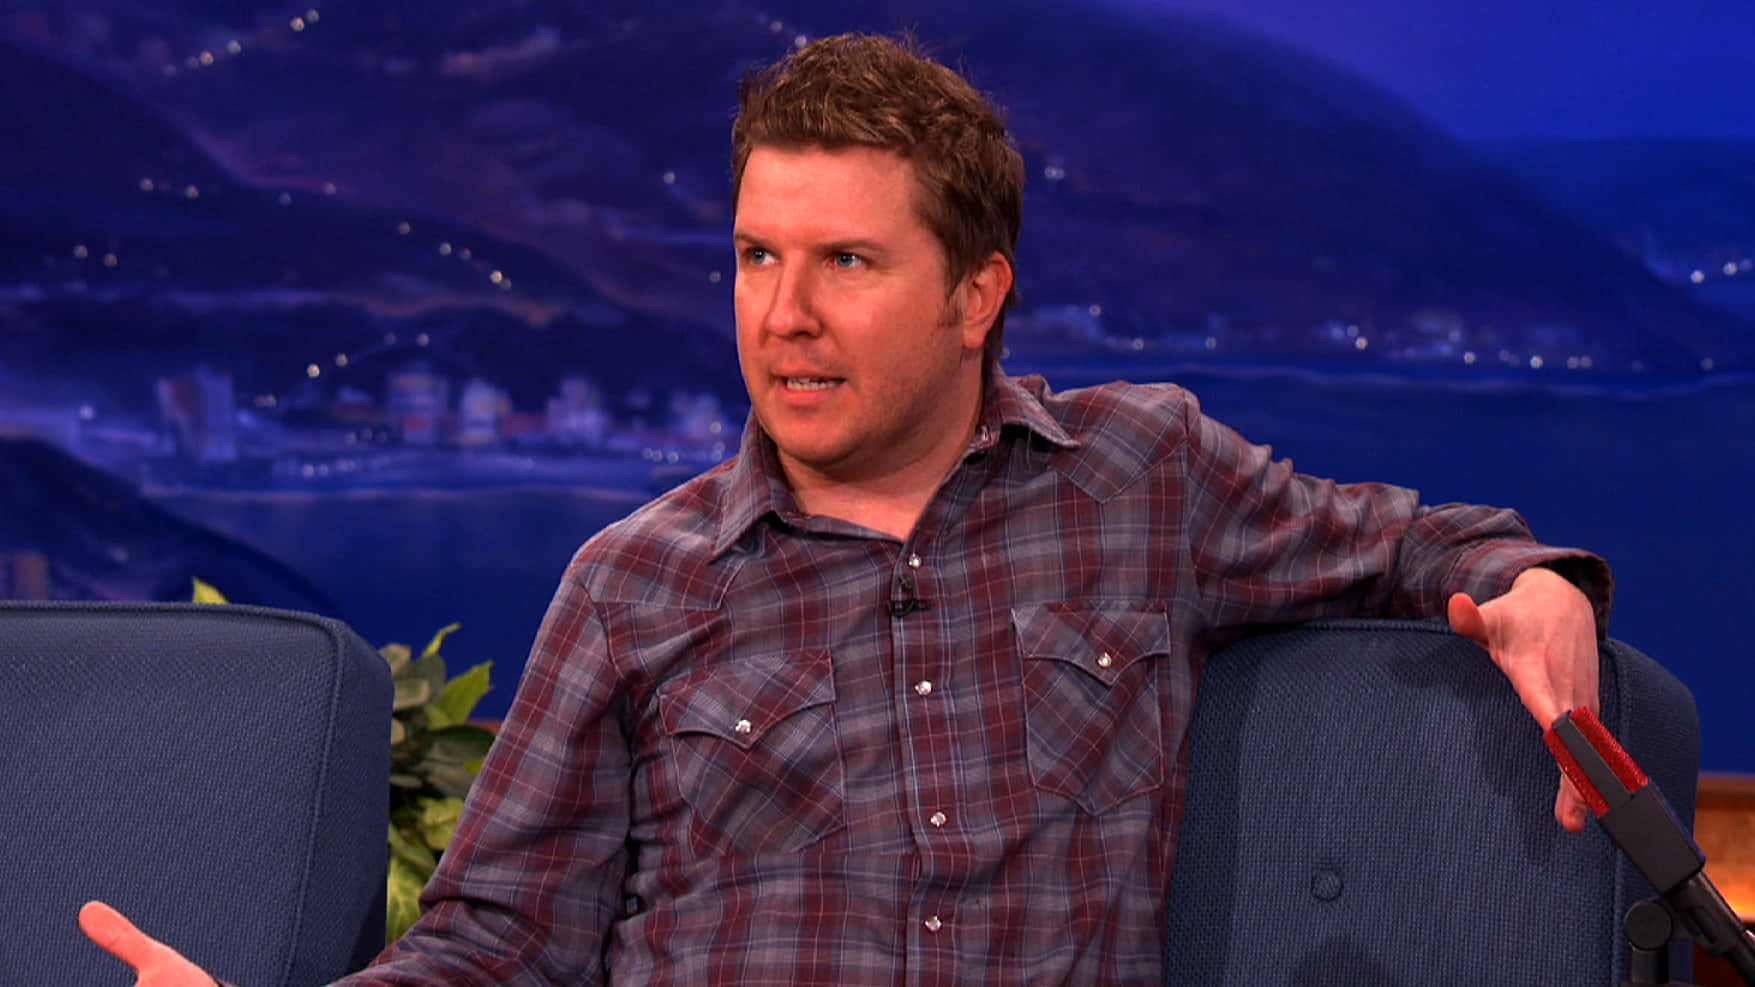 Comedian and actor Nick Swardson looks cool and confident on stage. Wallpaper